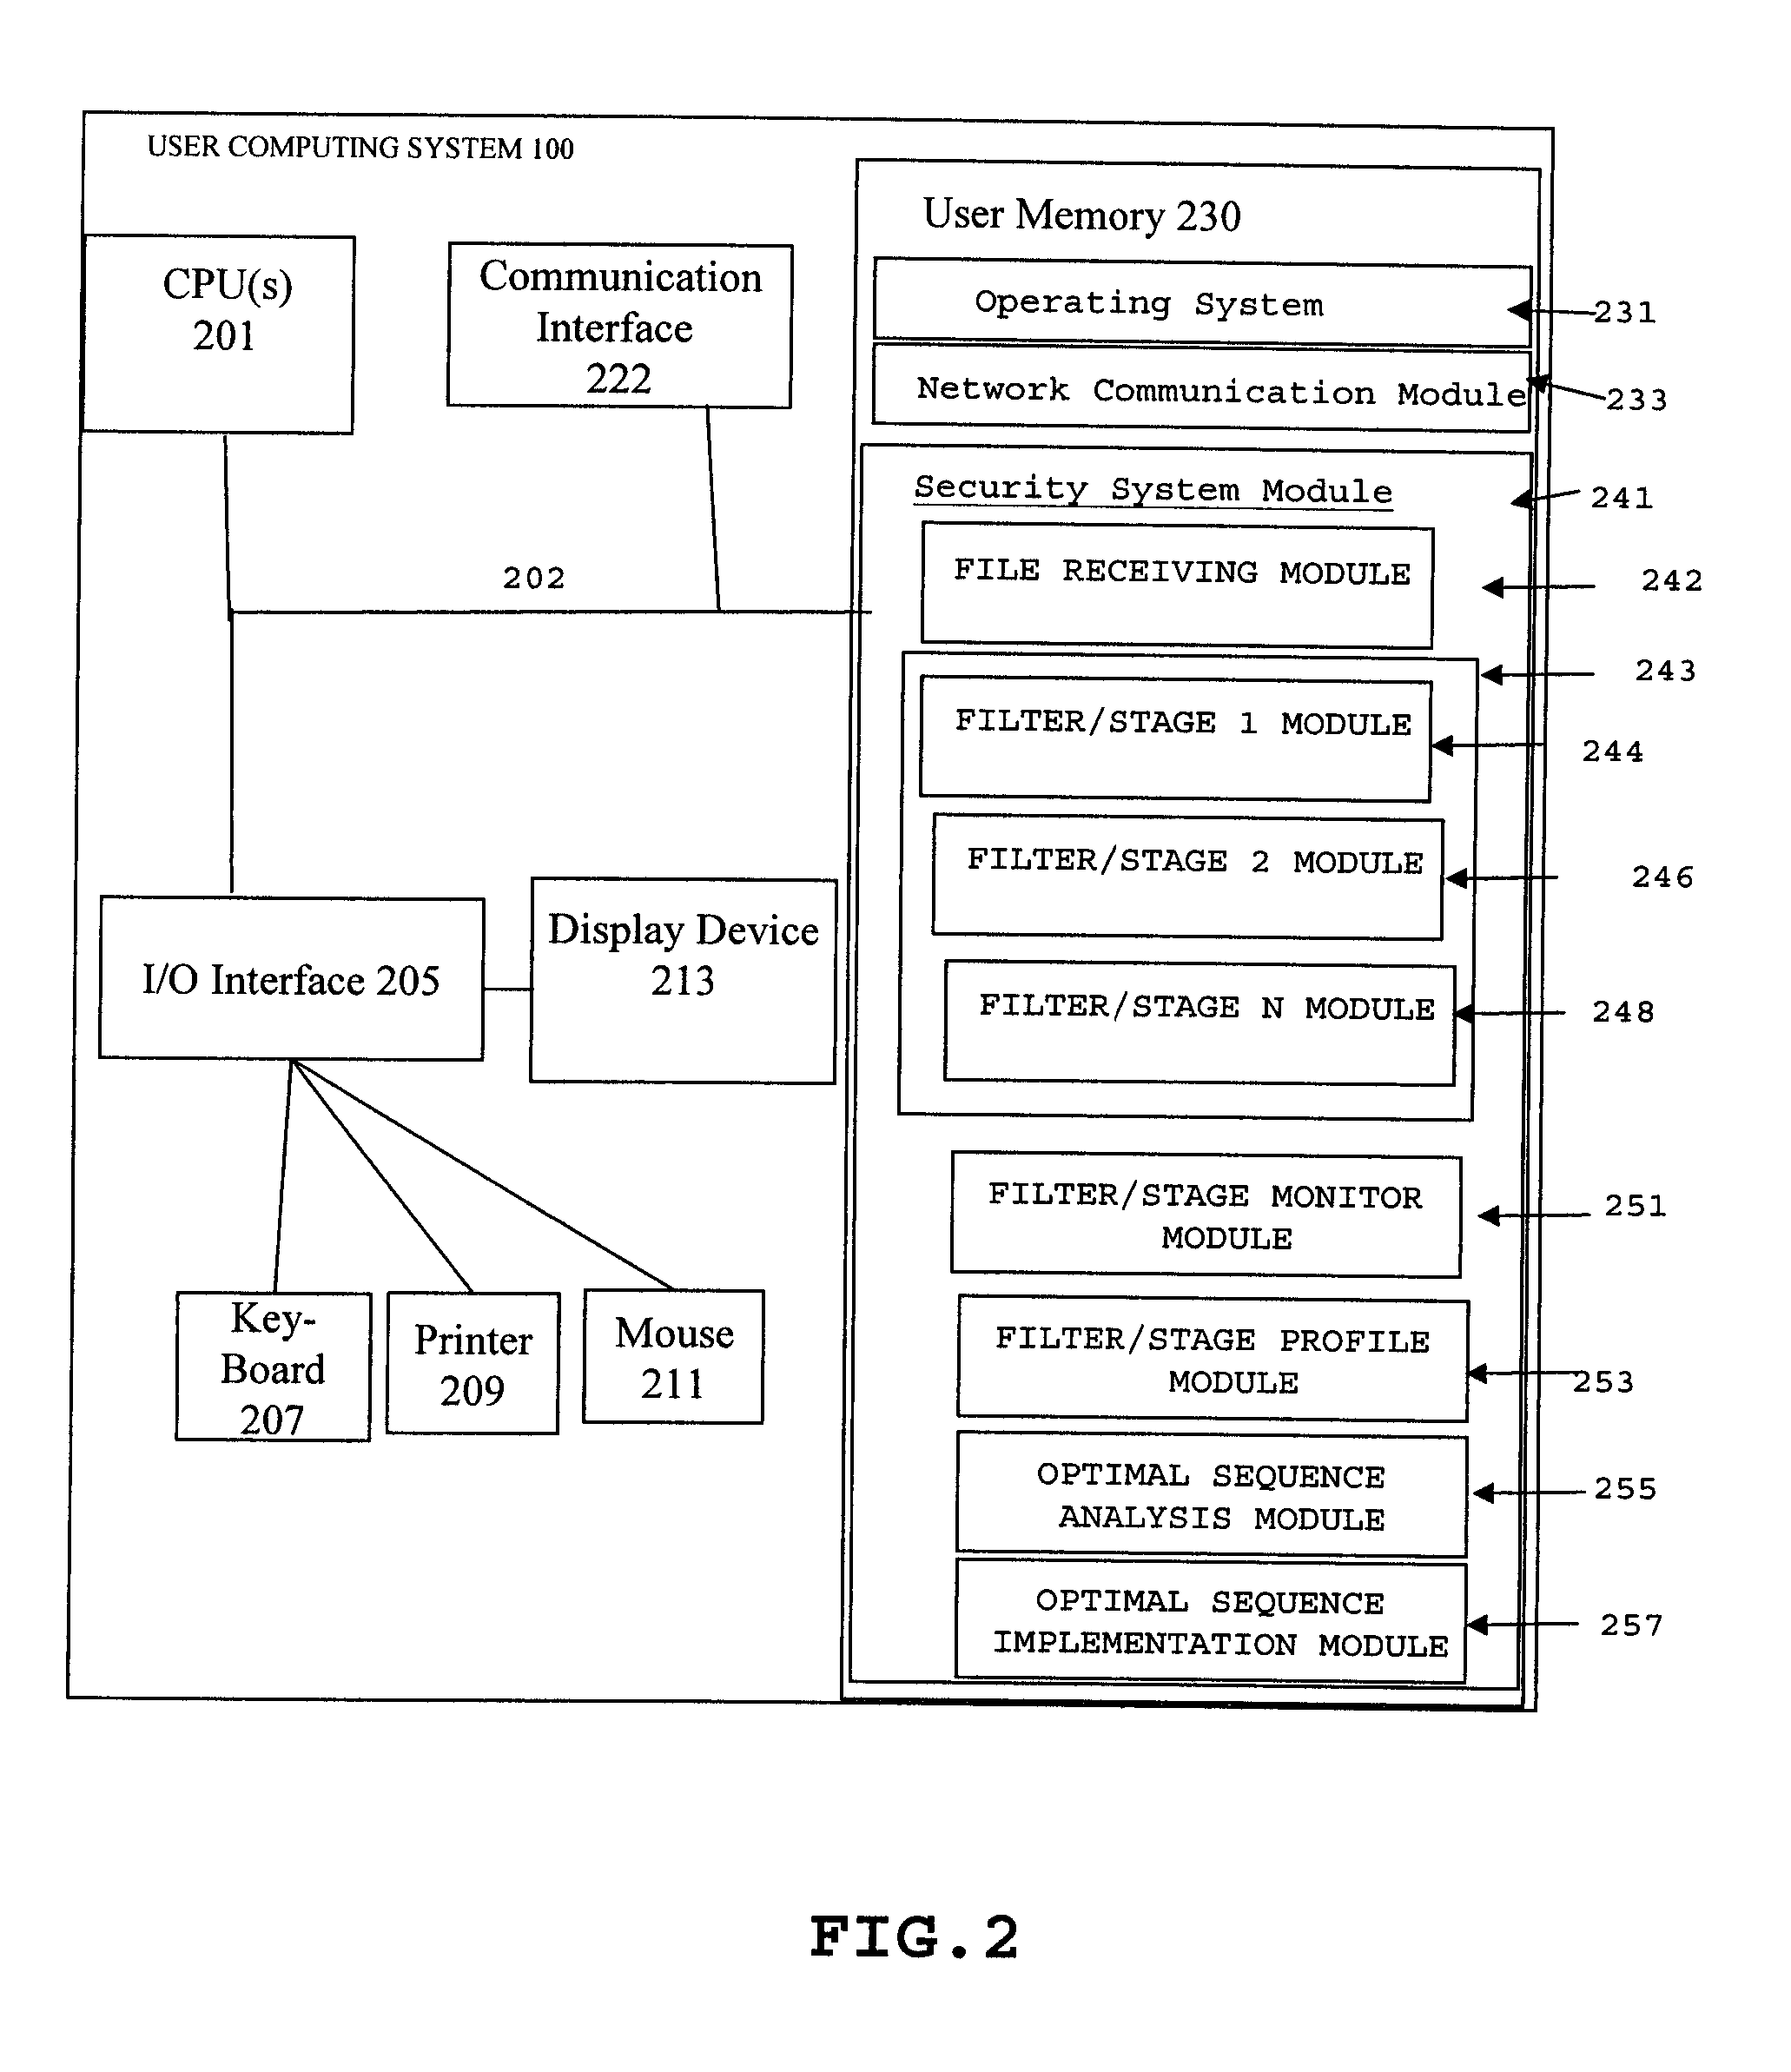 Method and system for dynamically optimizing multiple filter/stage security systems